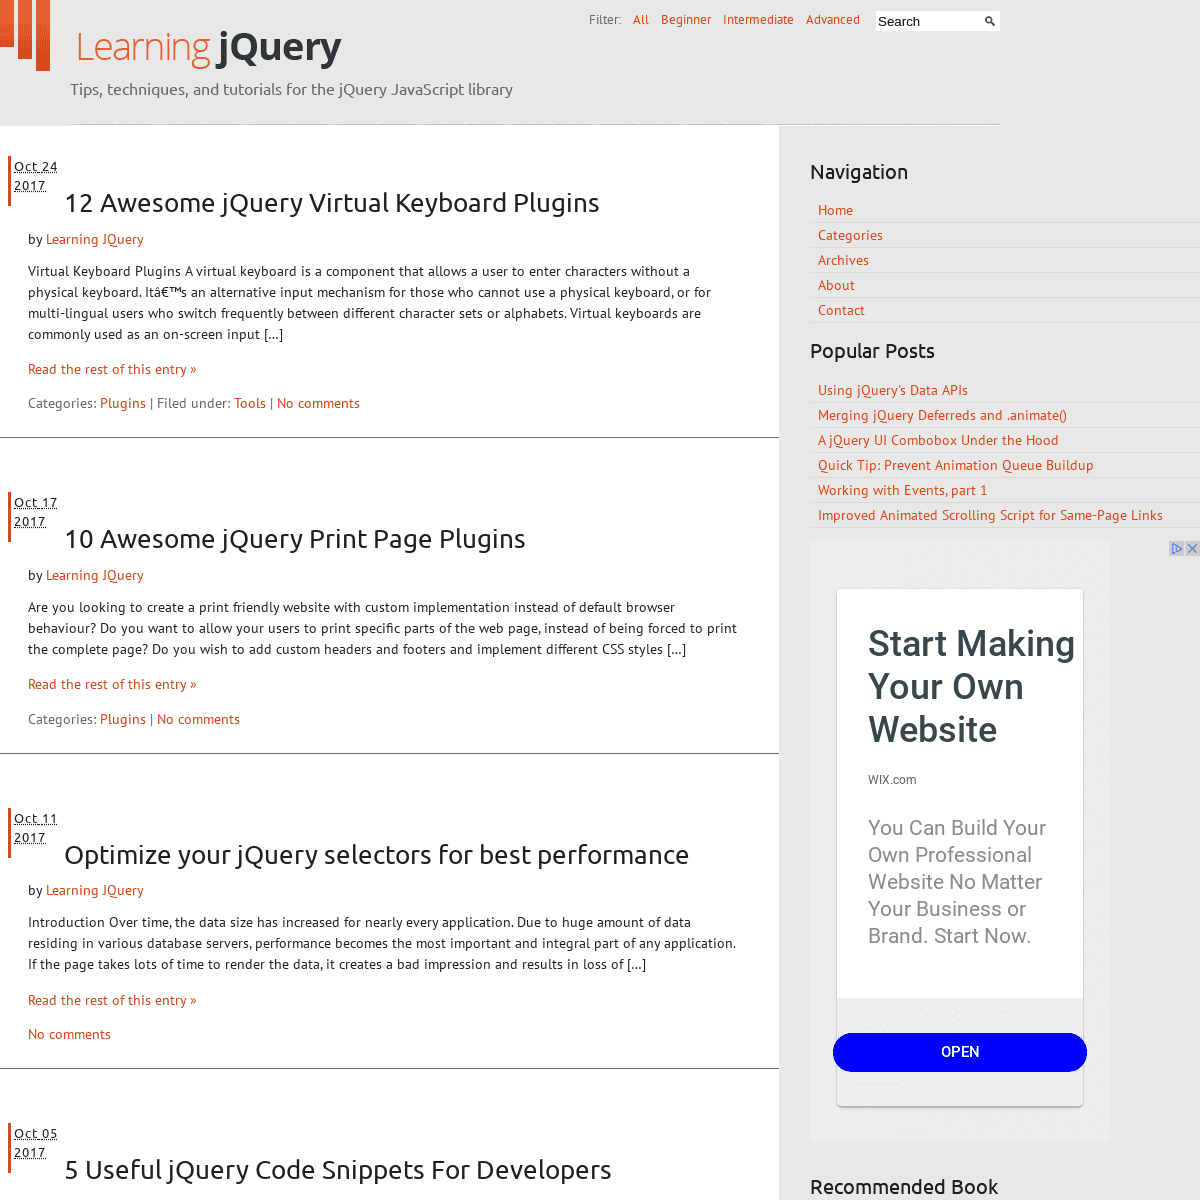 A complete backup of learningjquery.com